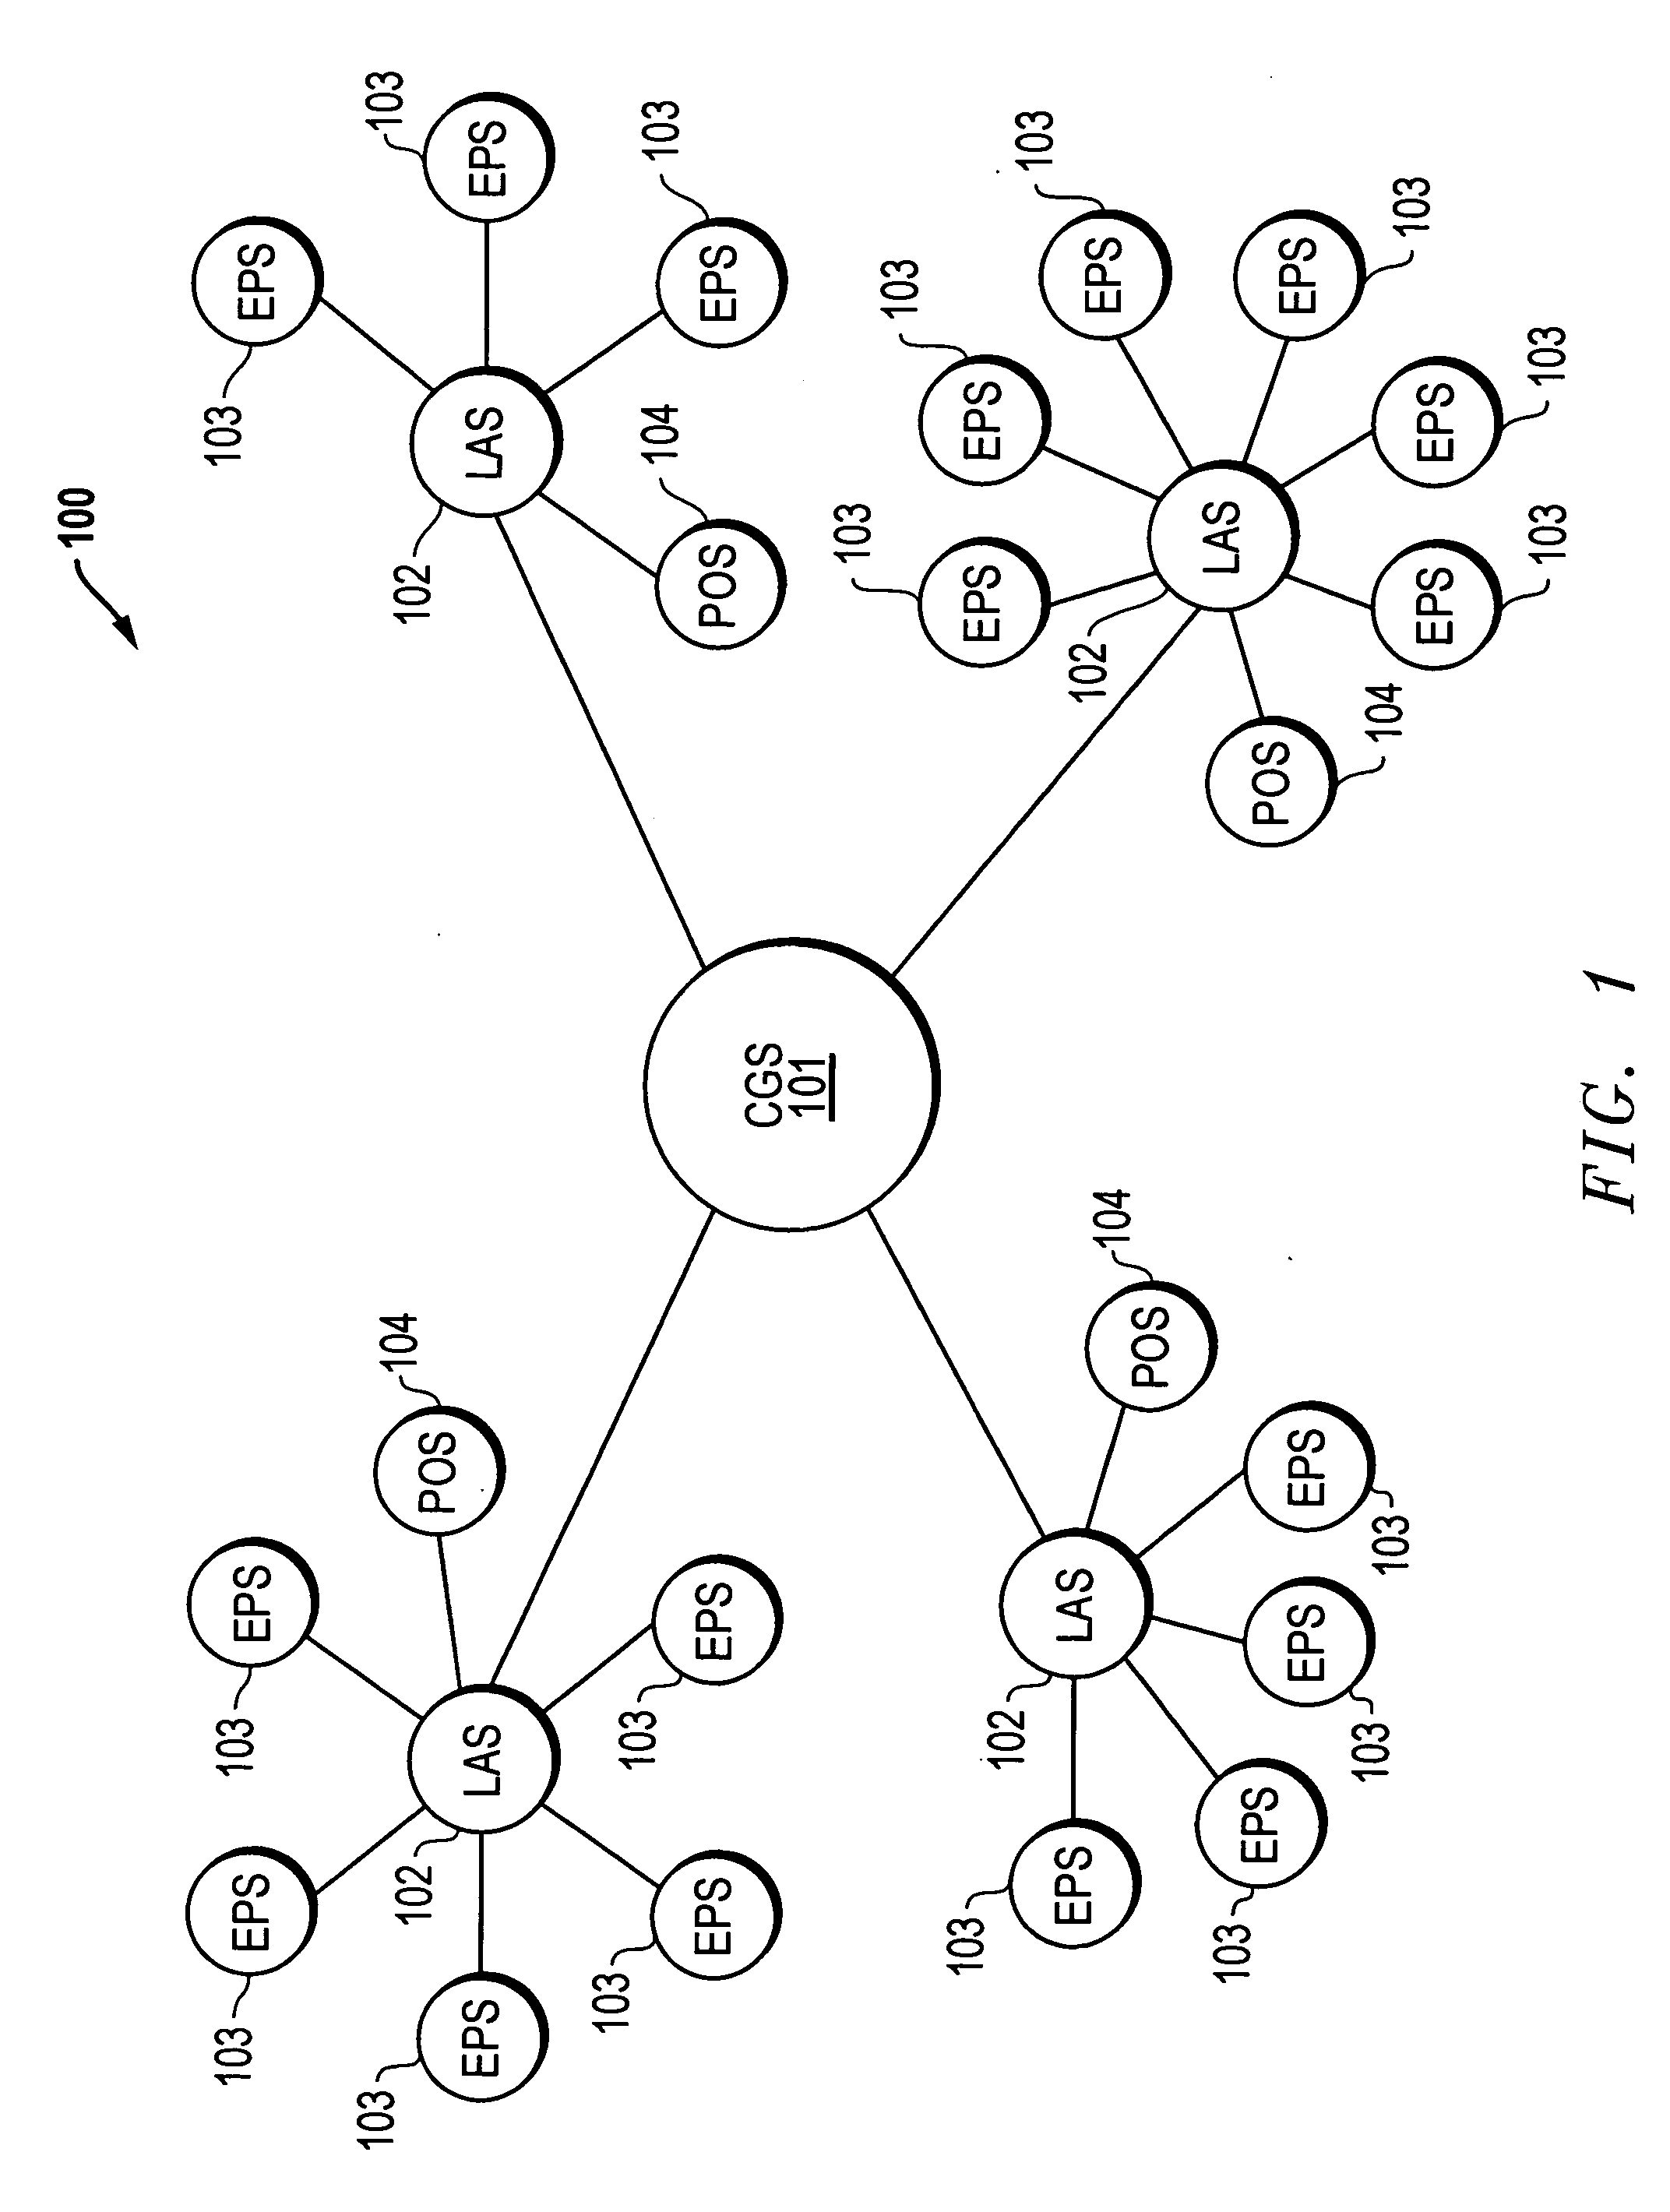 Networked bingo gaming system and gaming and method using physical bingo card